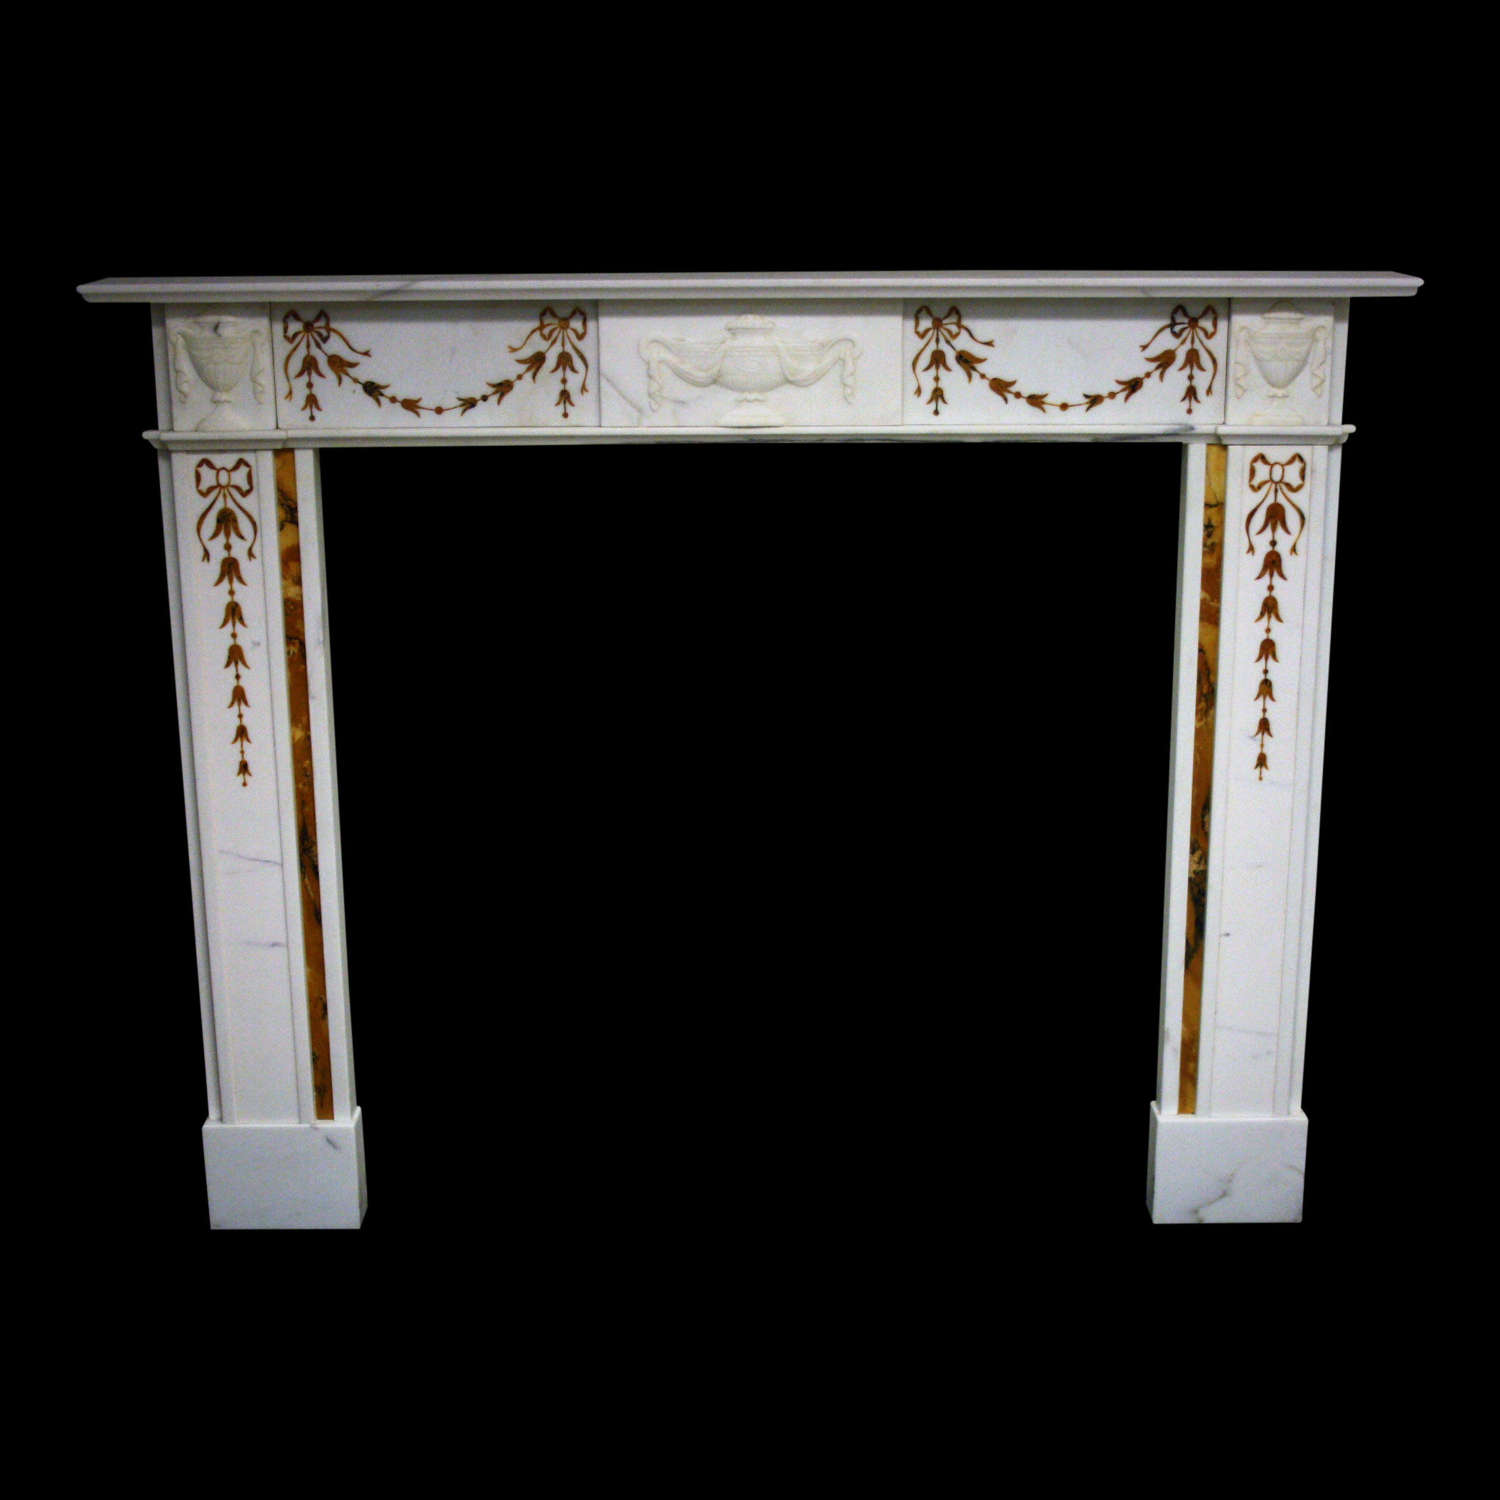 20th century statuary white marble and sienna inlay fireplace